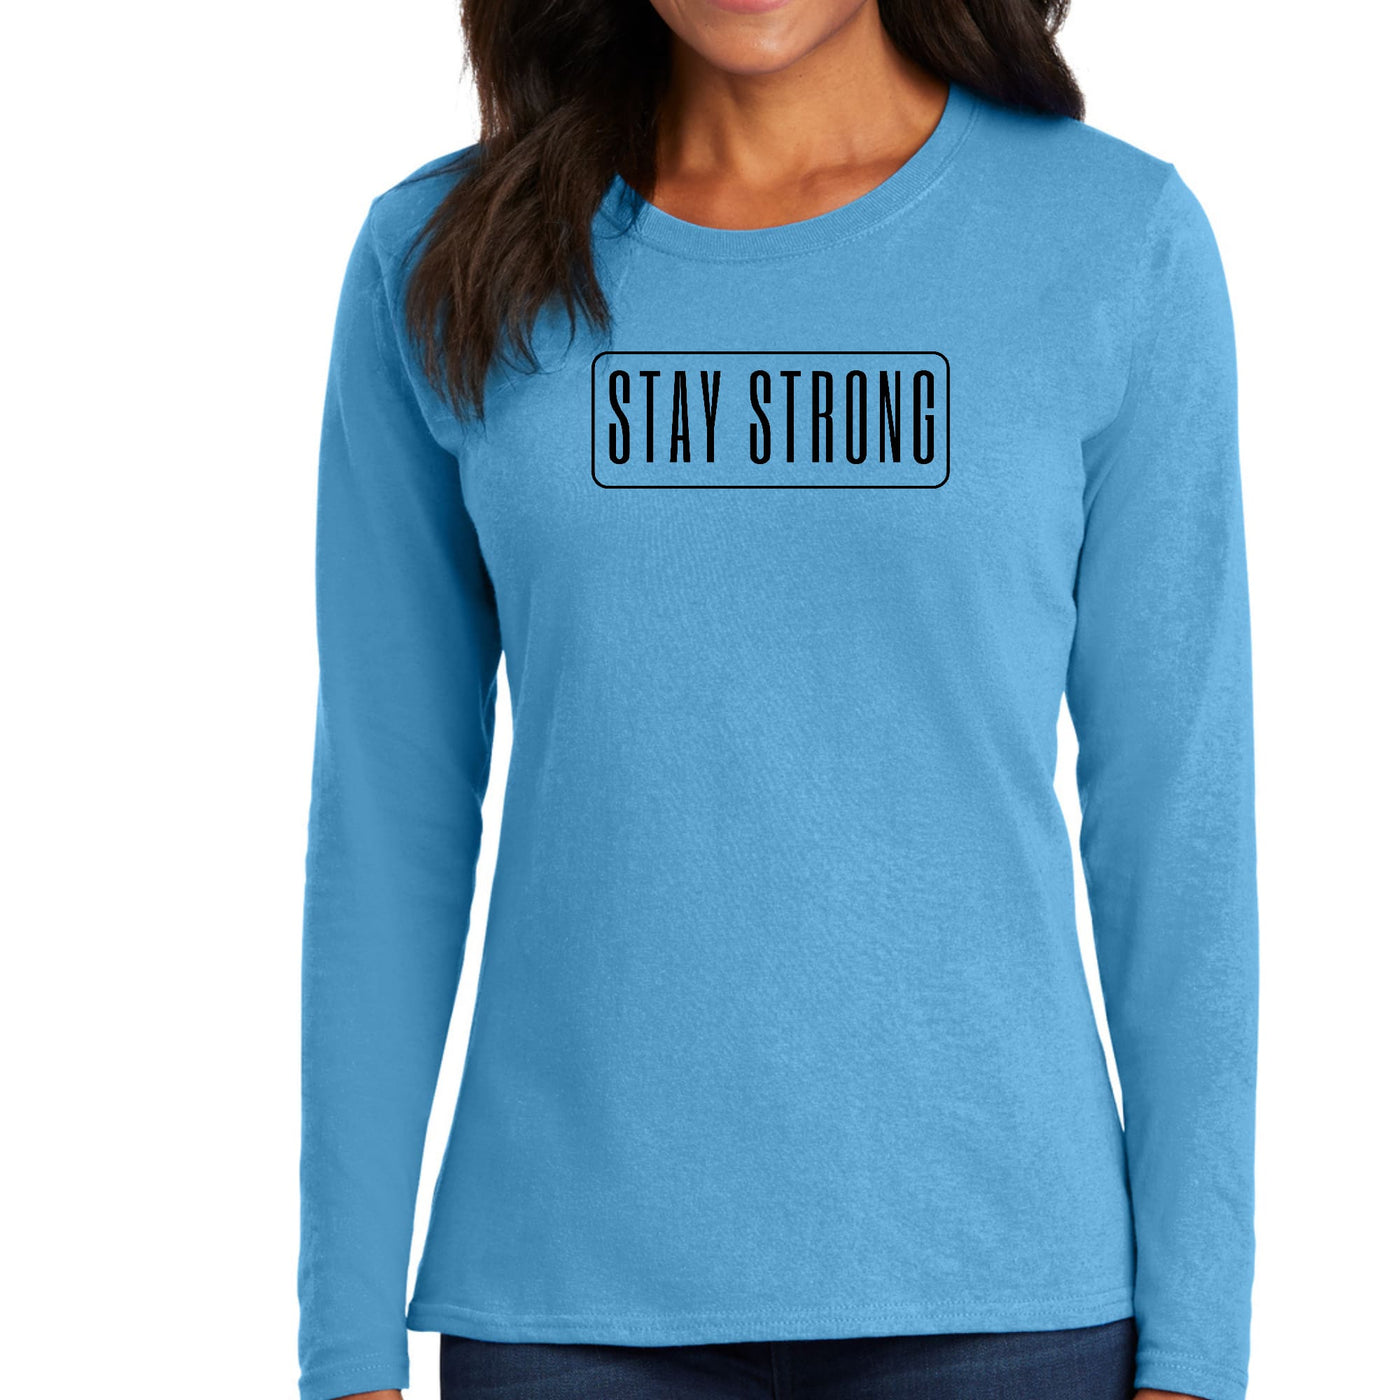 Womens Long Sleeve Graphic T-shirt Stay Strong Print - Womens | T-Shirts | Long